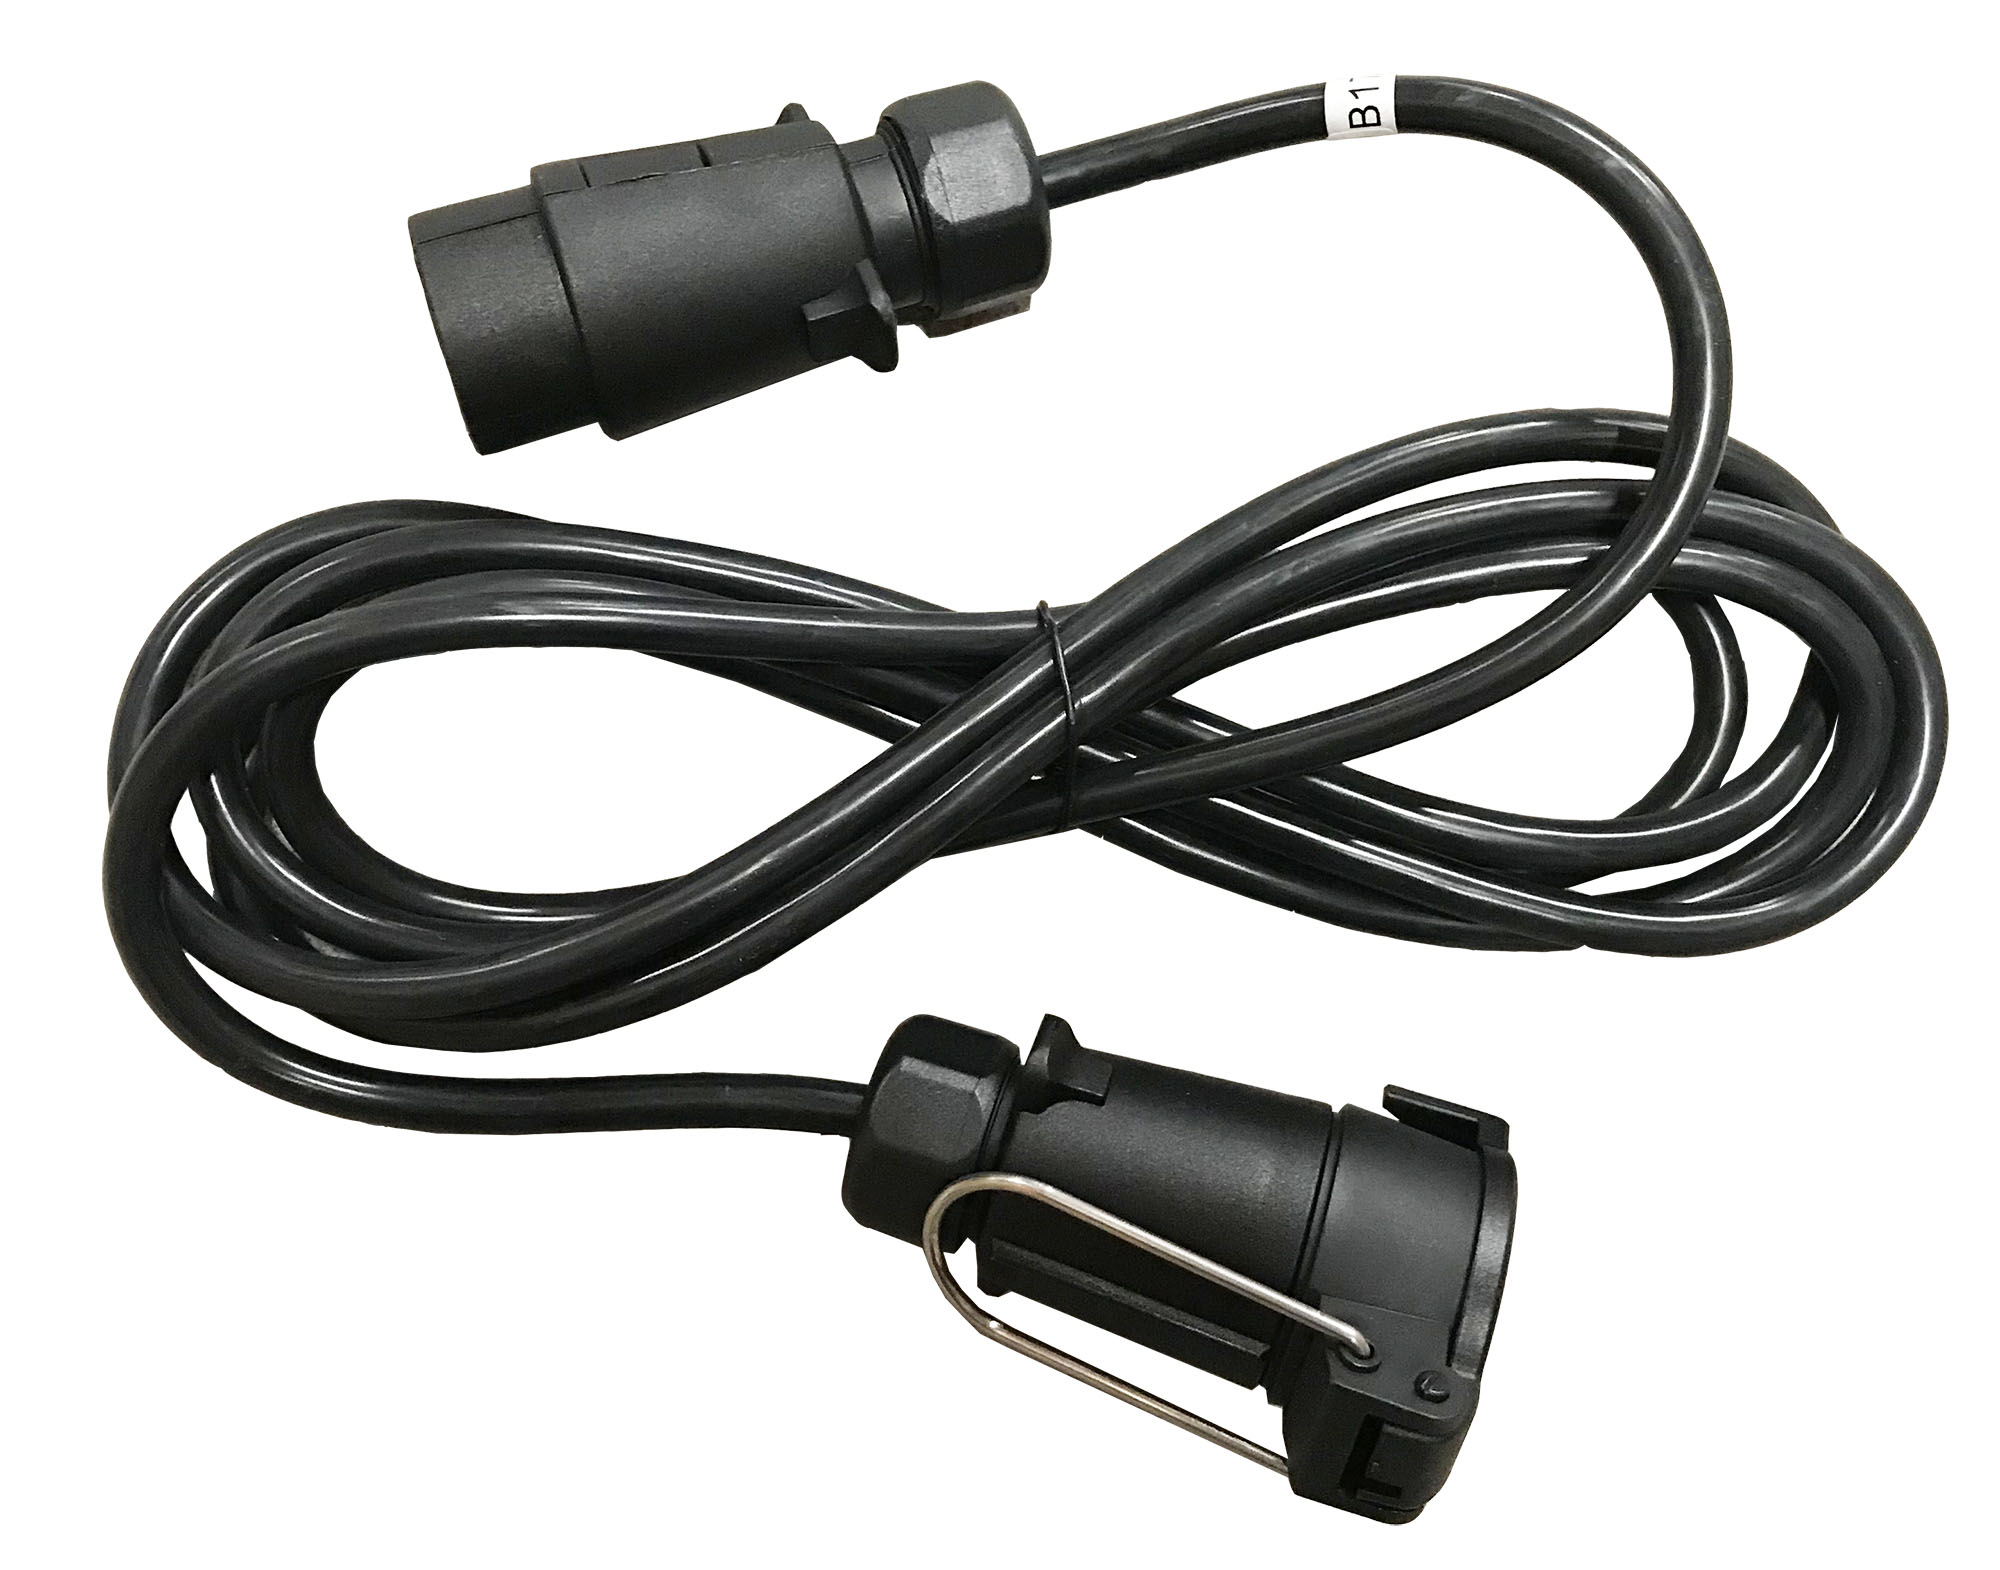 Trailer extension cables